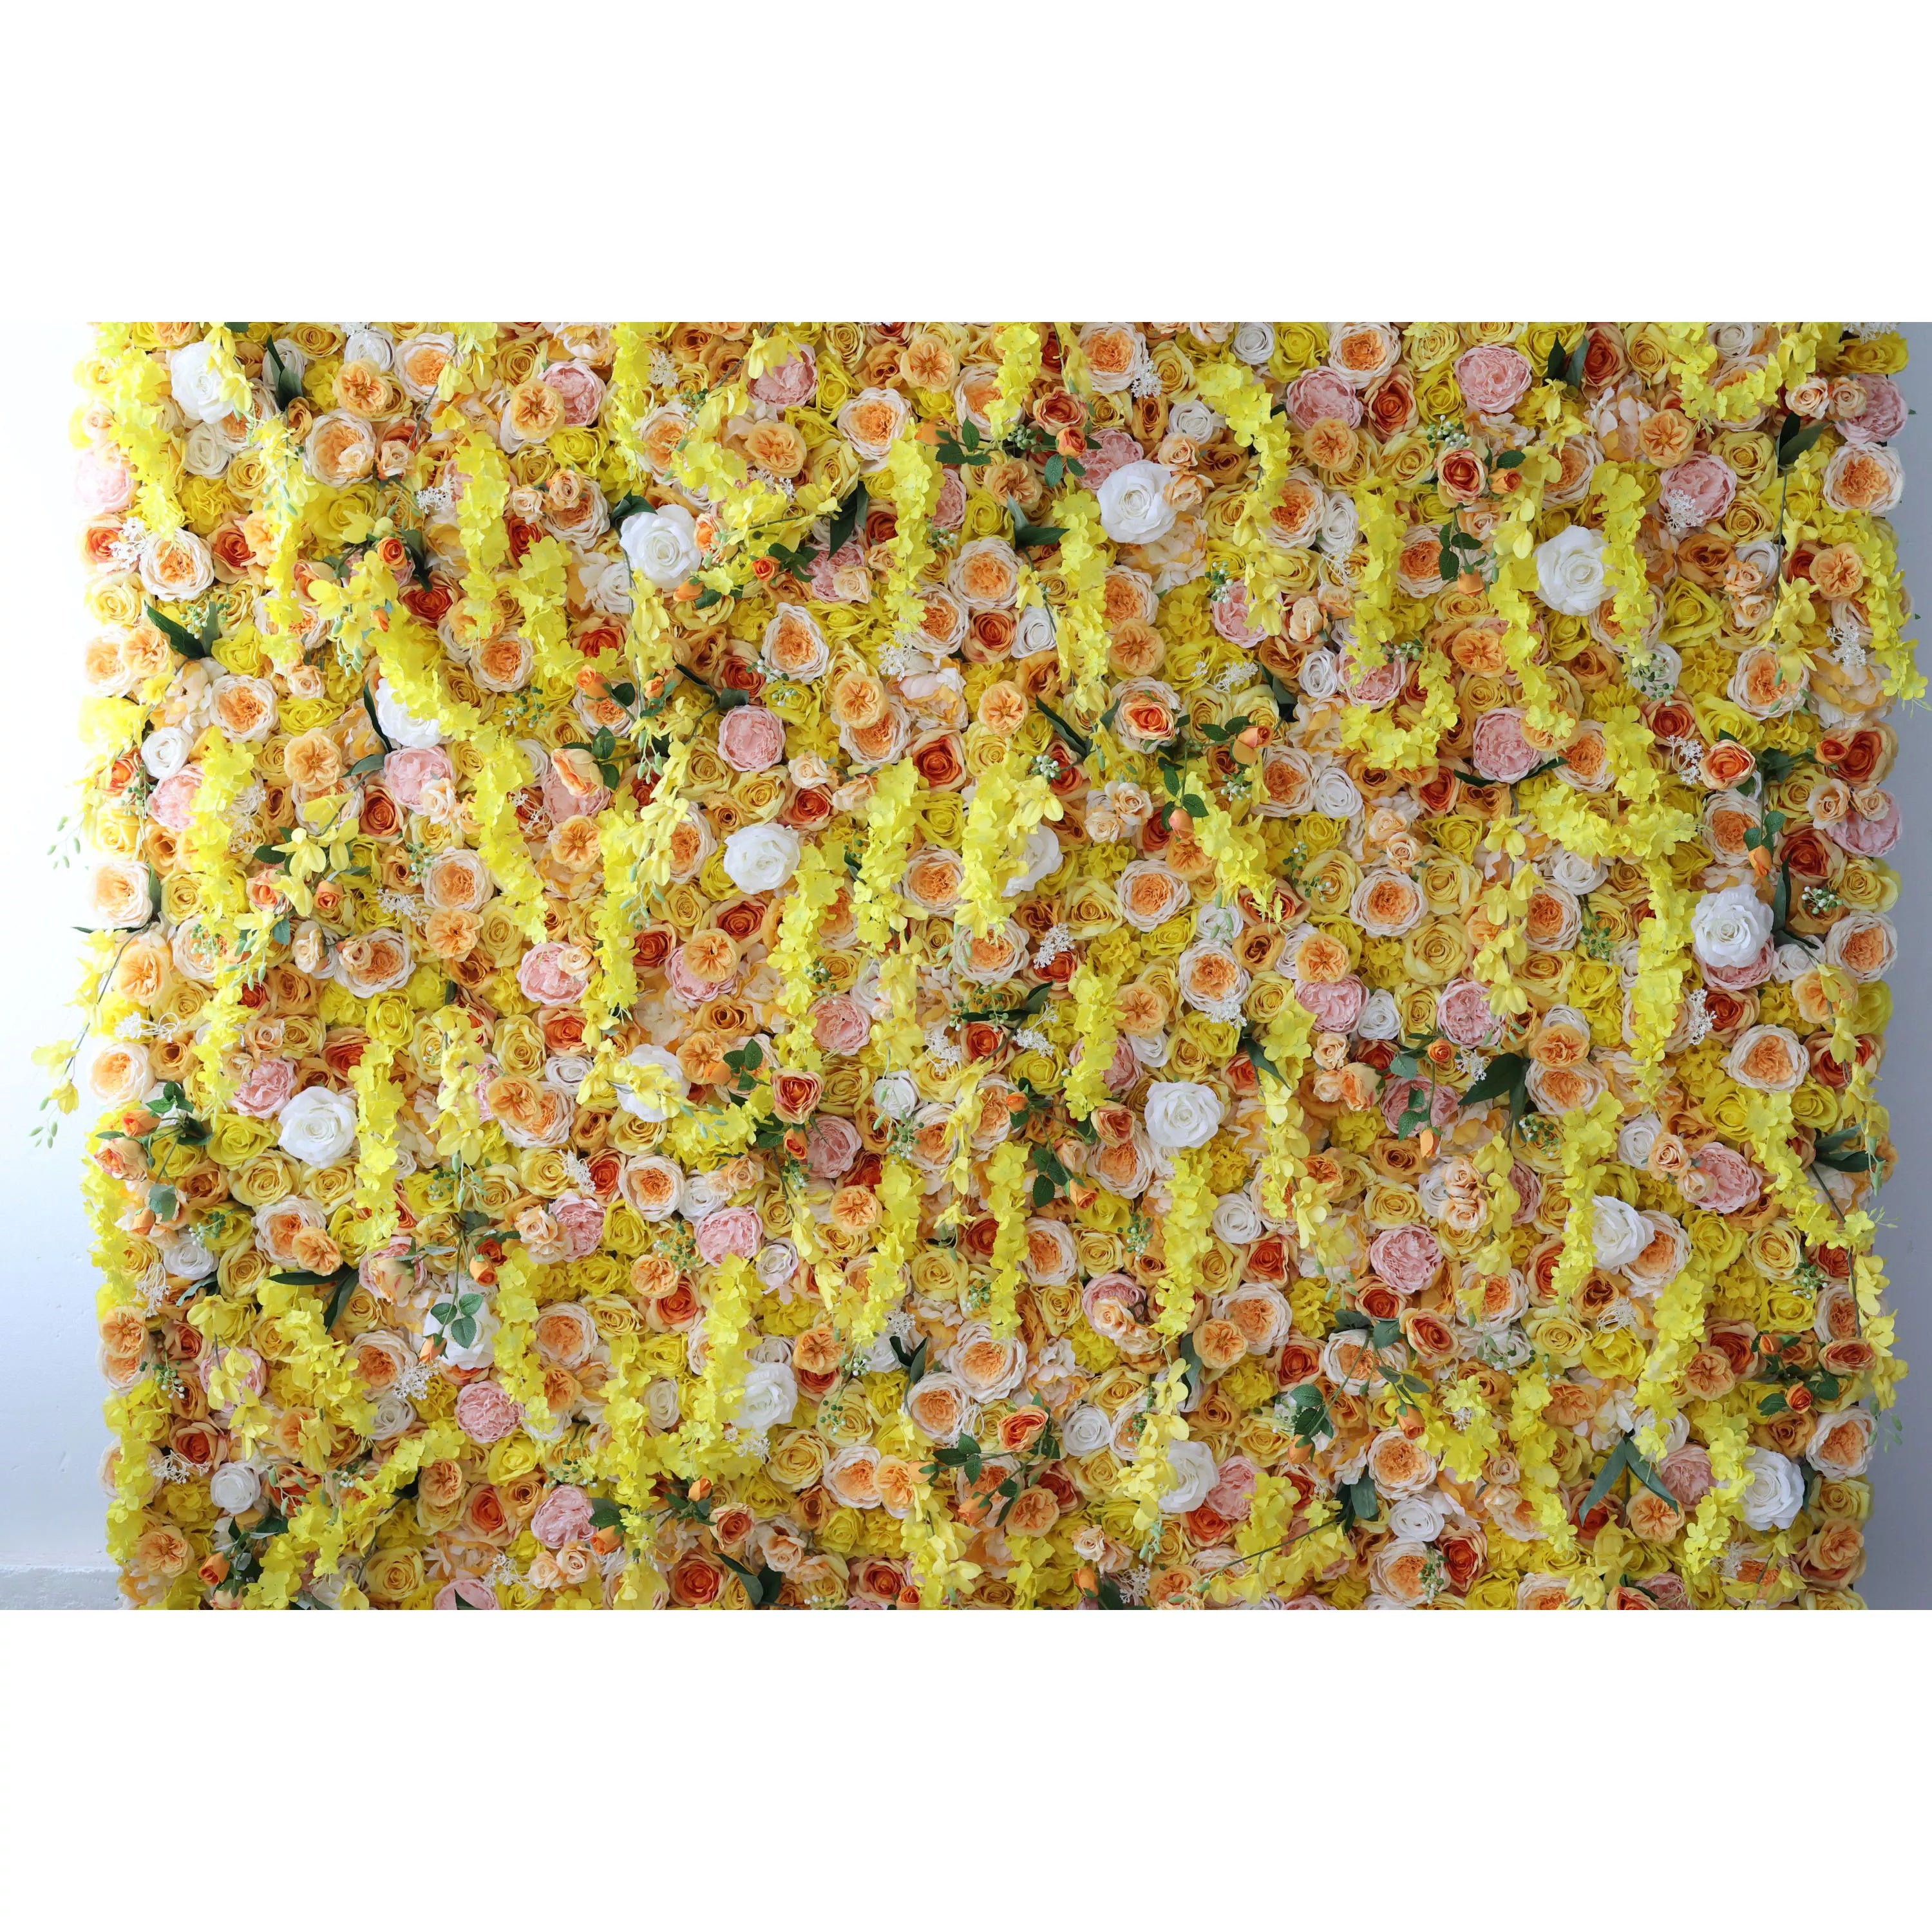 ValarFlowers Artificial Floral Wall Backdrop: Sunlit Symphony - A Radiant Cascade of Golden Blooms-VF-252